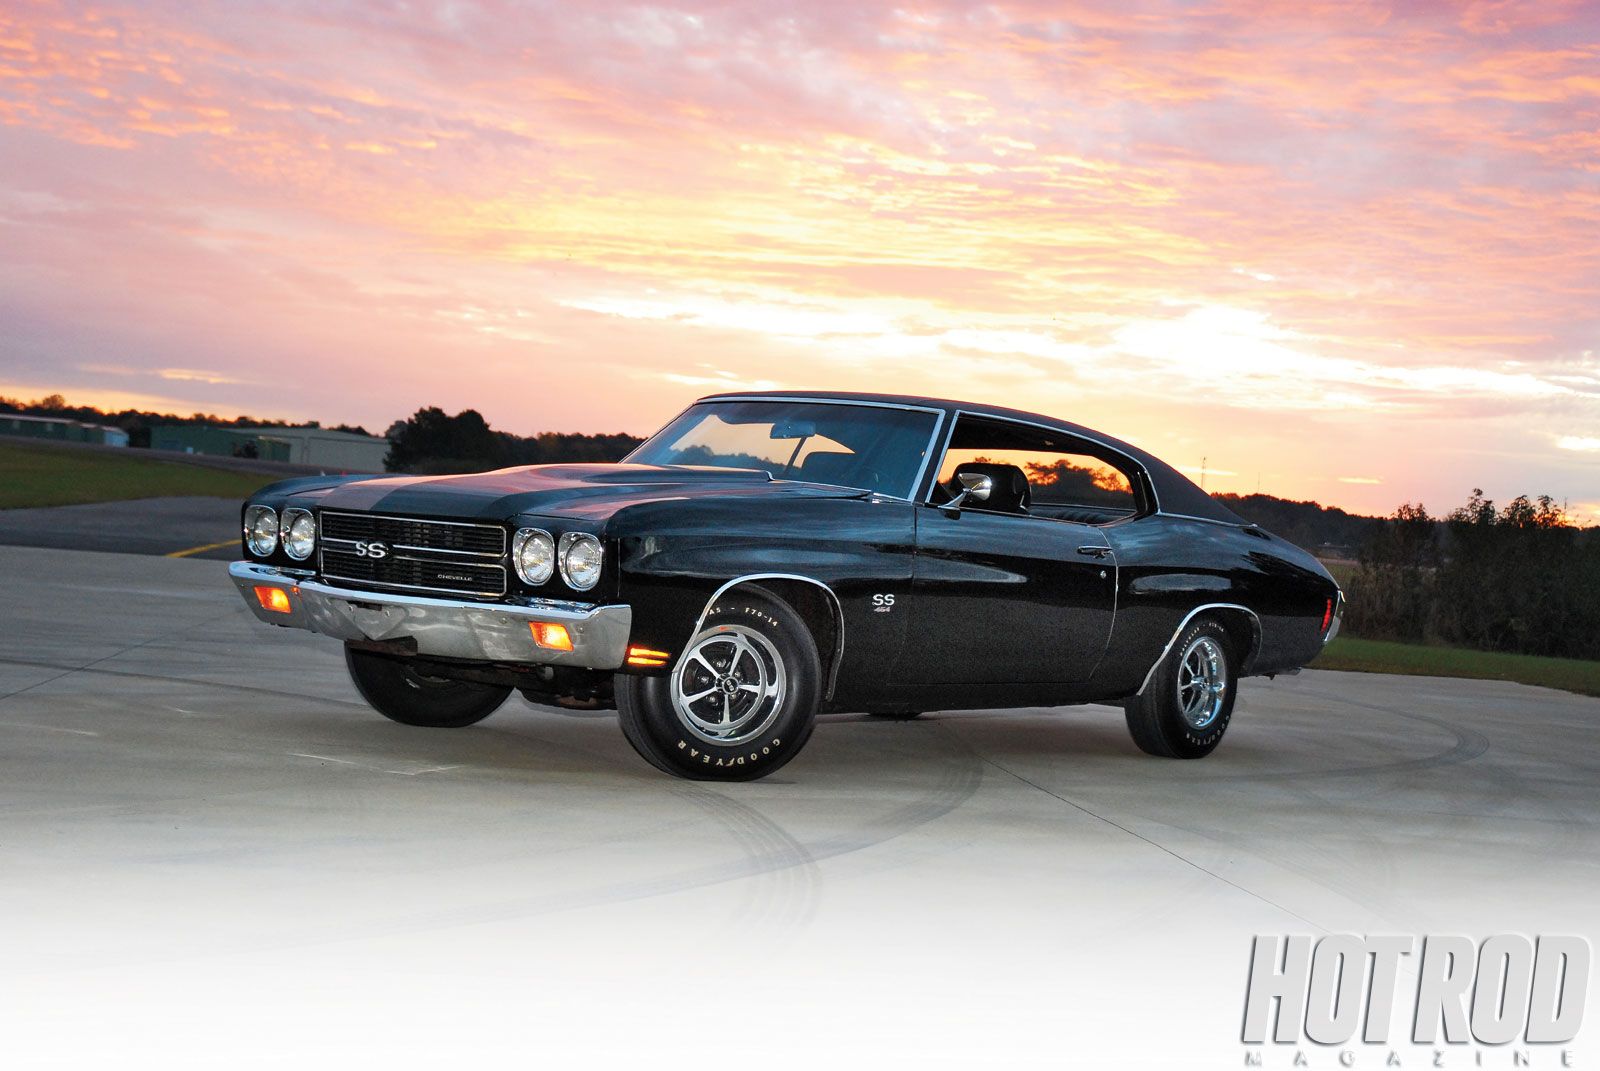 1970 CHEVY CHEVELLE SS 454 Computer Wallpapers Desktop Backgrounds